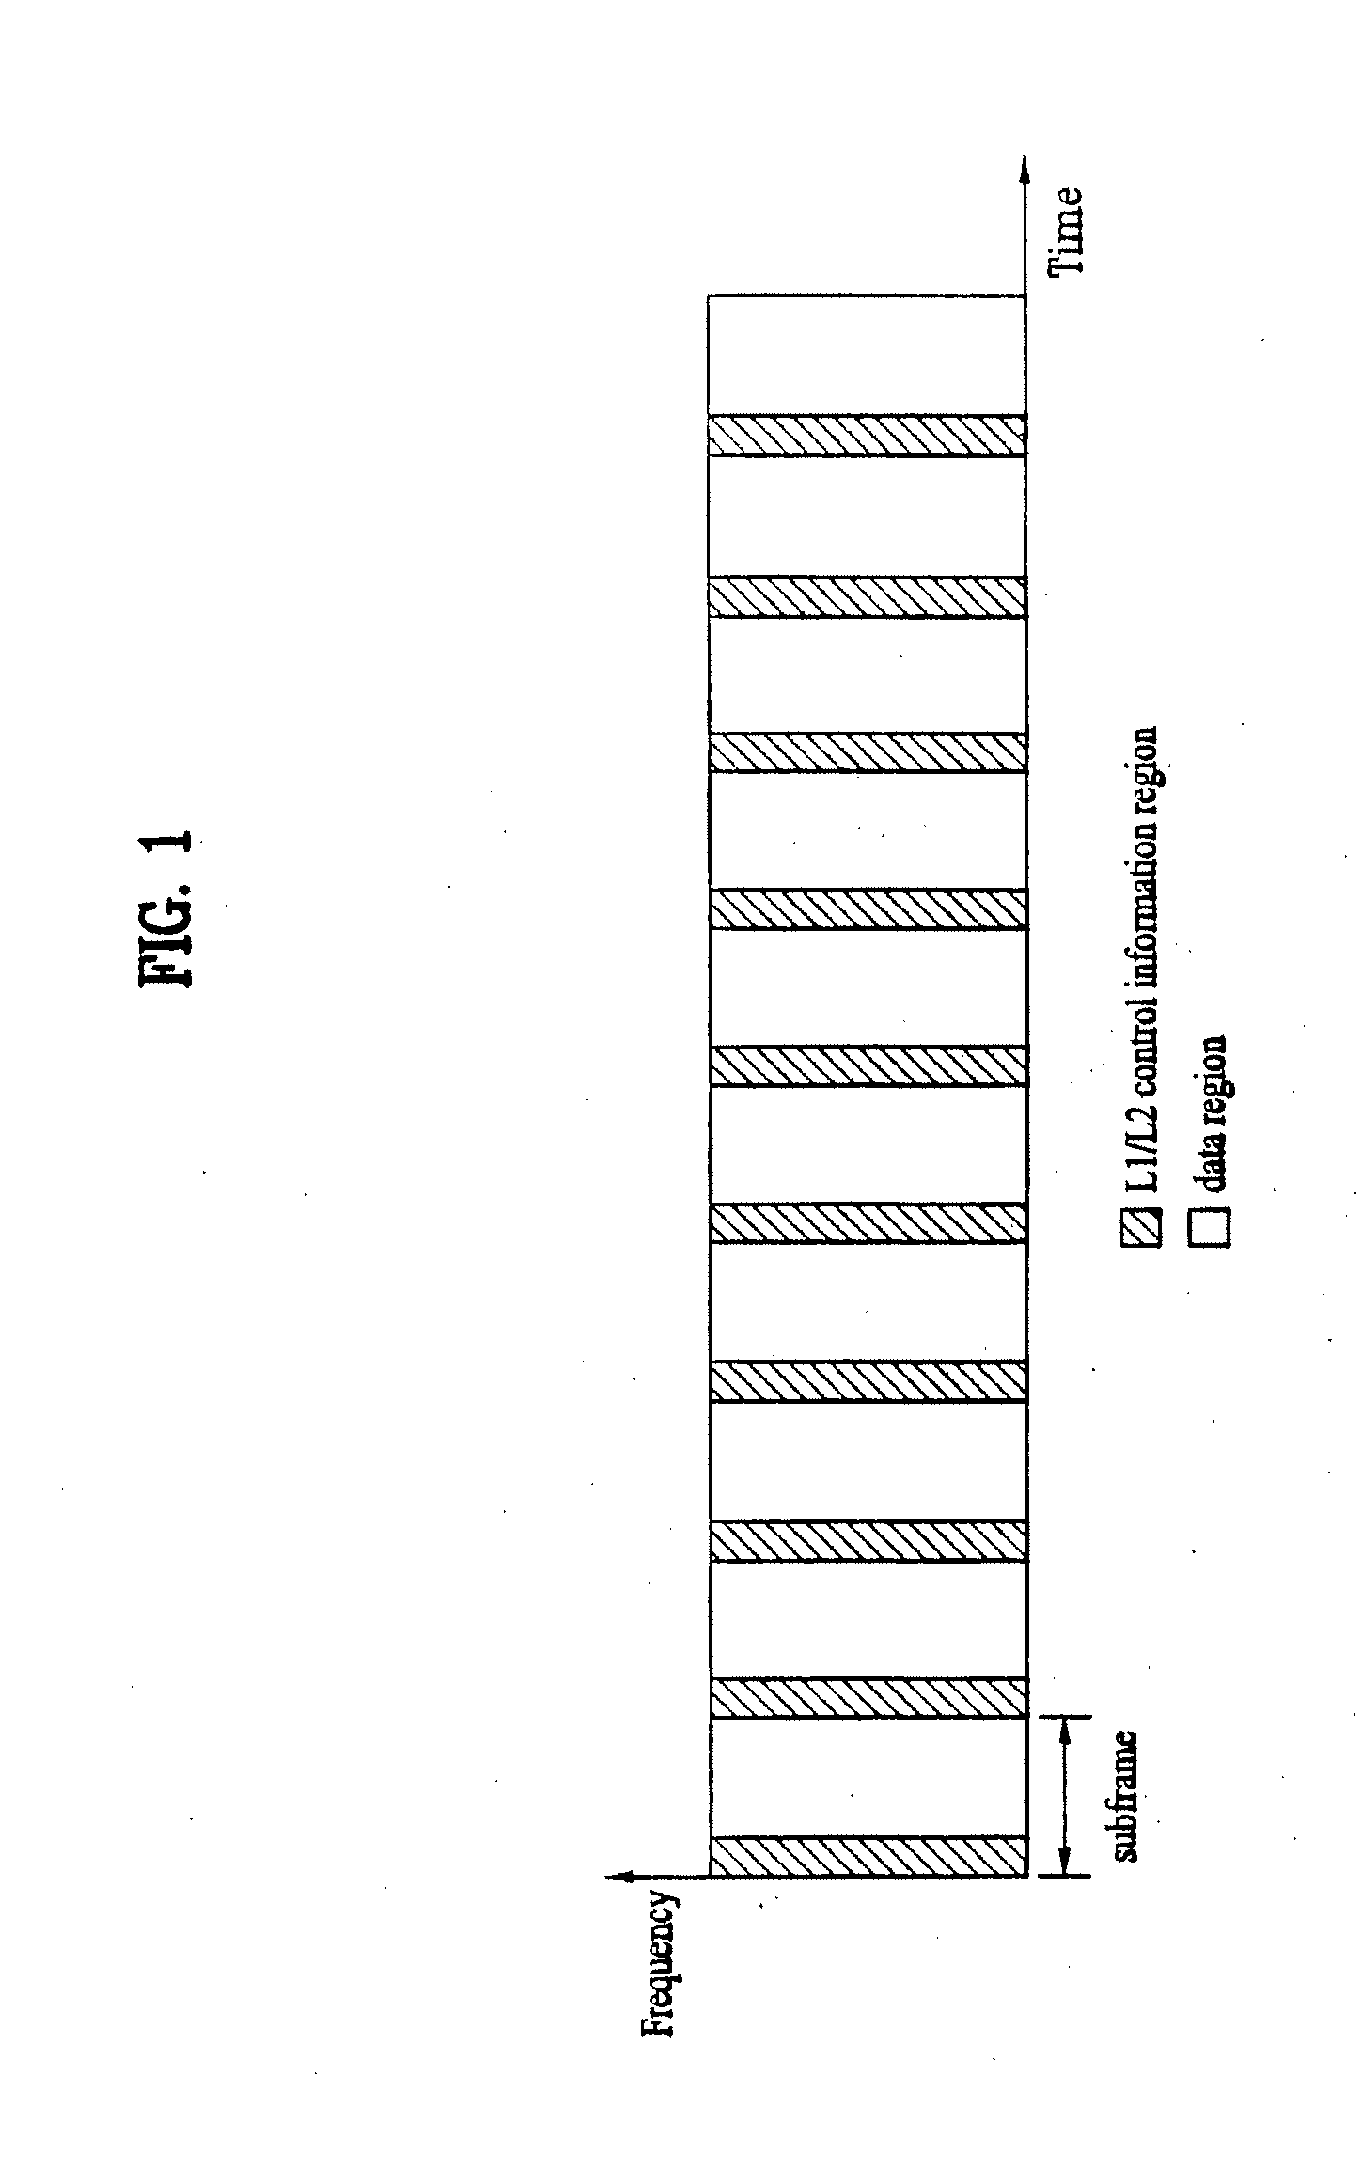 Method of Allocating Radio Resources in a Wireless Communication System